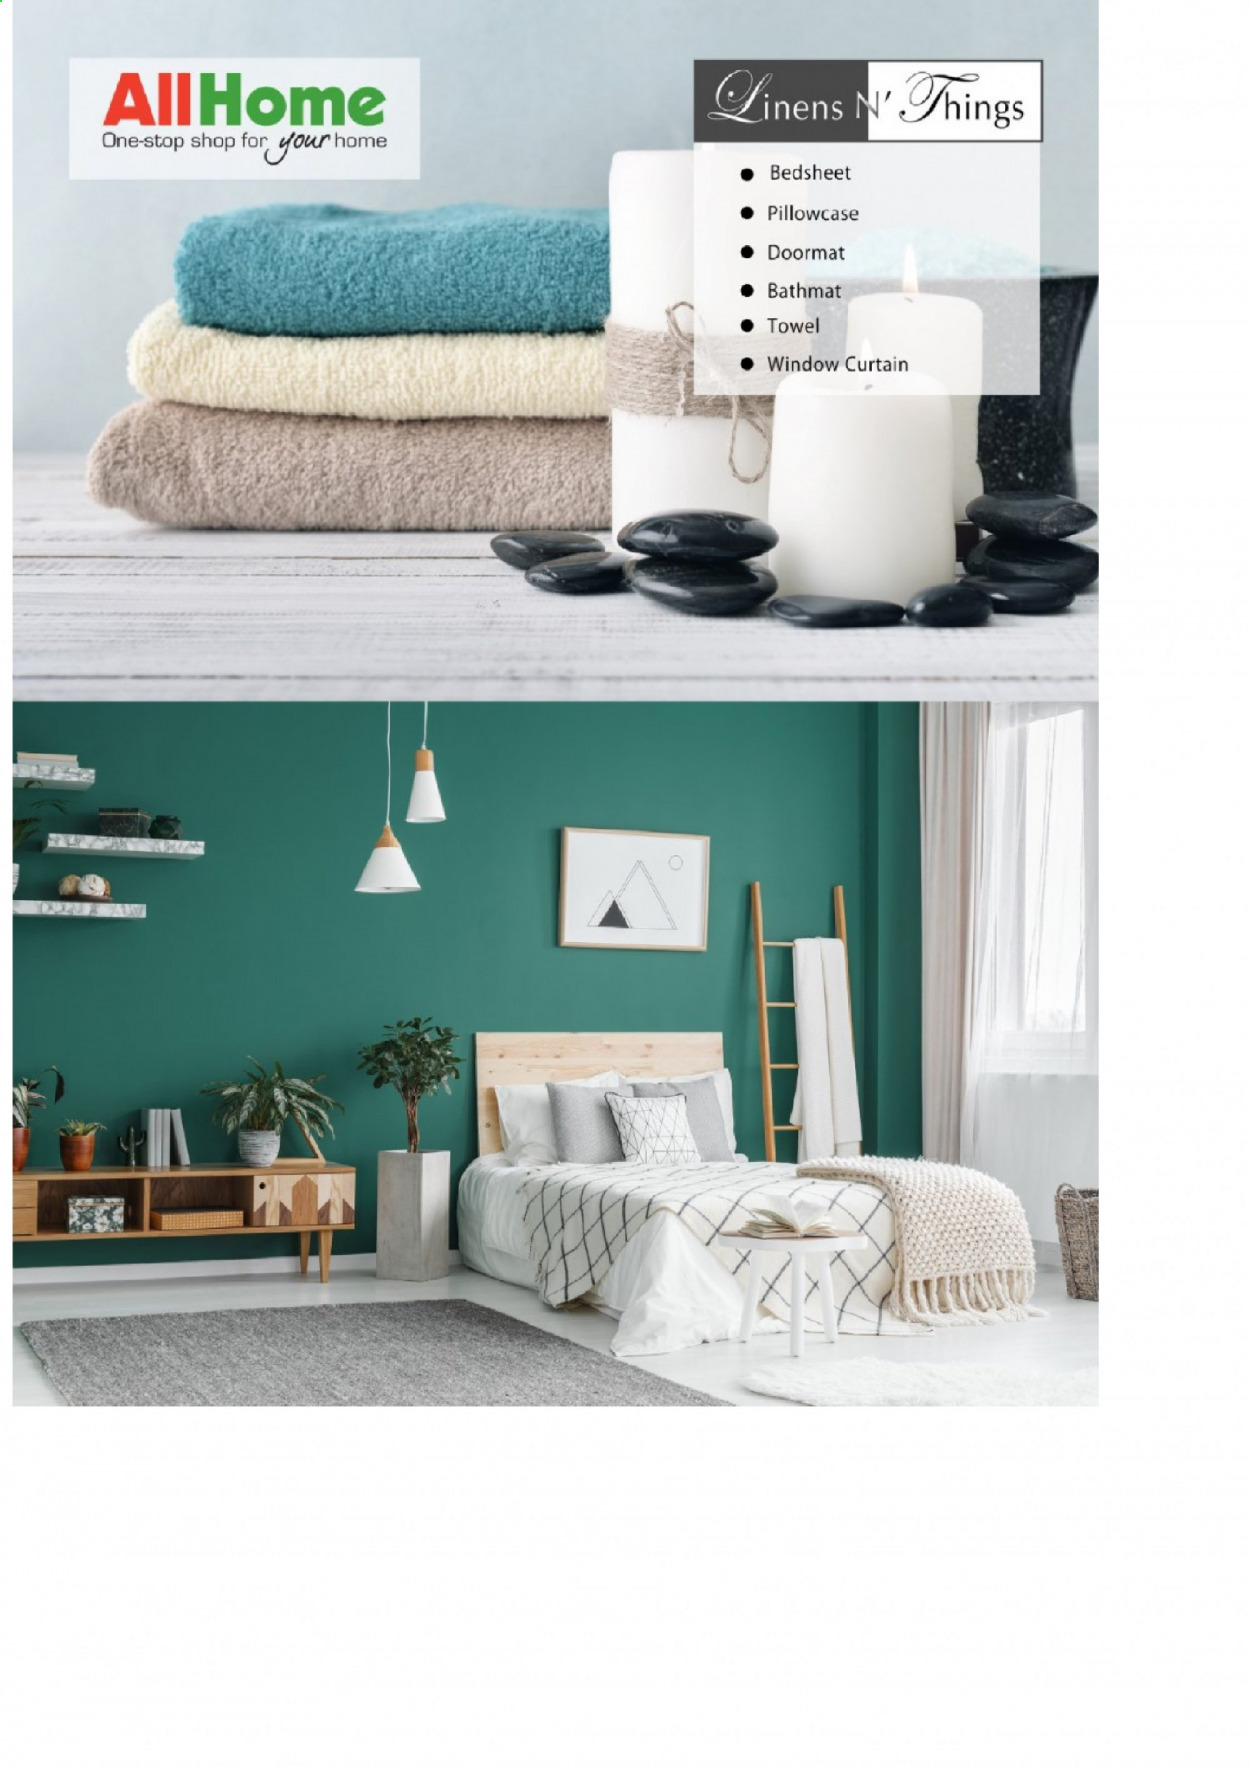 thumbnail - AllHome offer  - 23.3.2021 - 30.6.2021 - Sales products - bedding, linens, pillowcase, curtain, towel, door mat. Page 81.